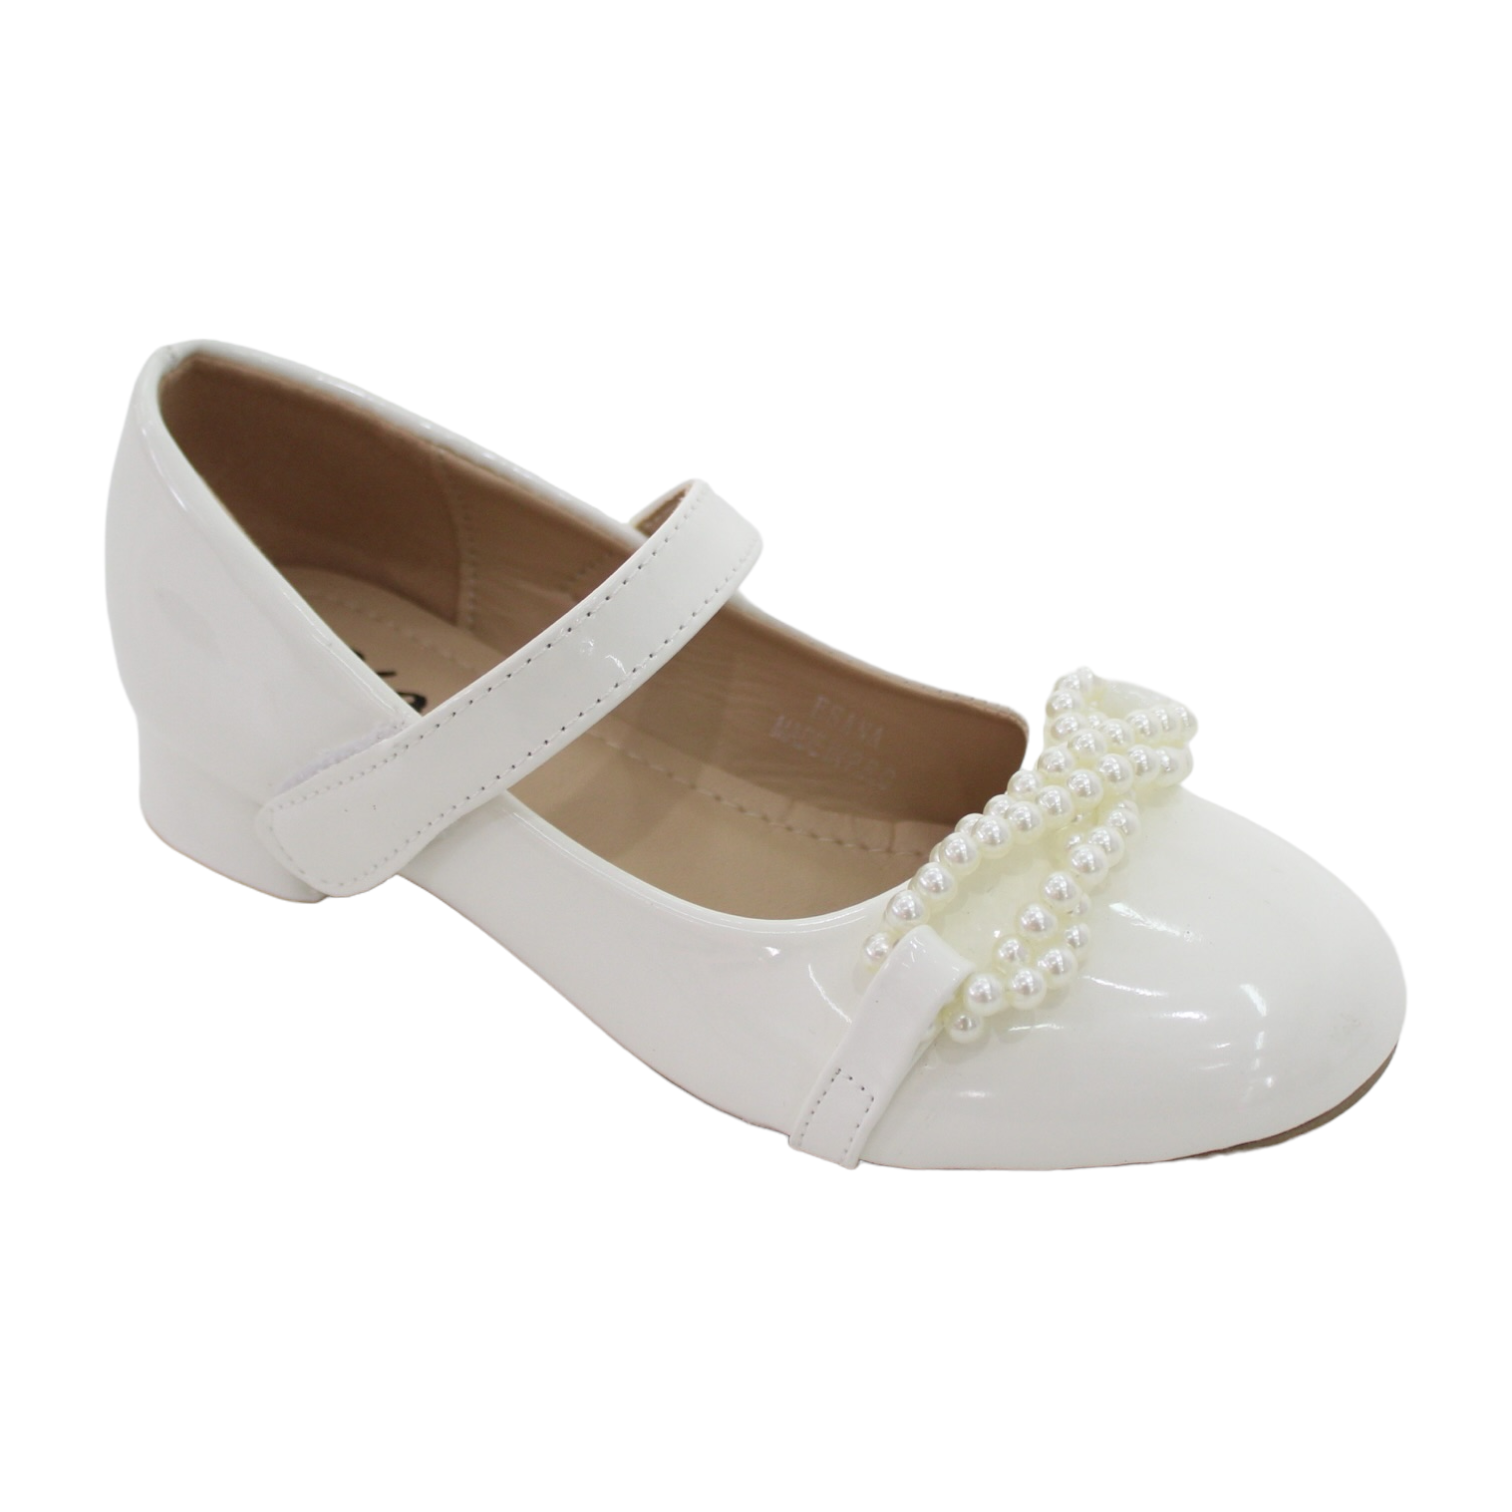 Esana girls dress pump with twisted pearls detailed white